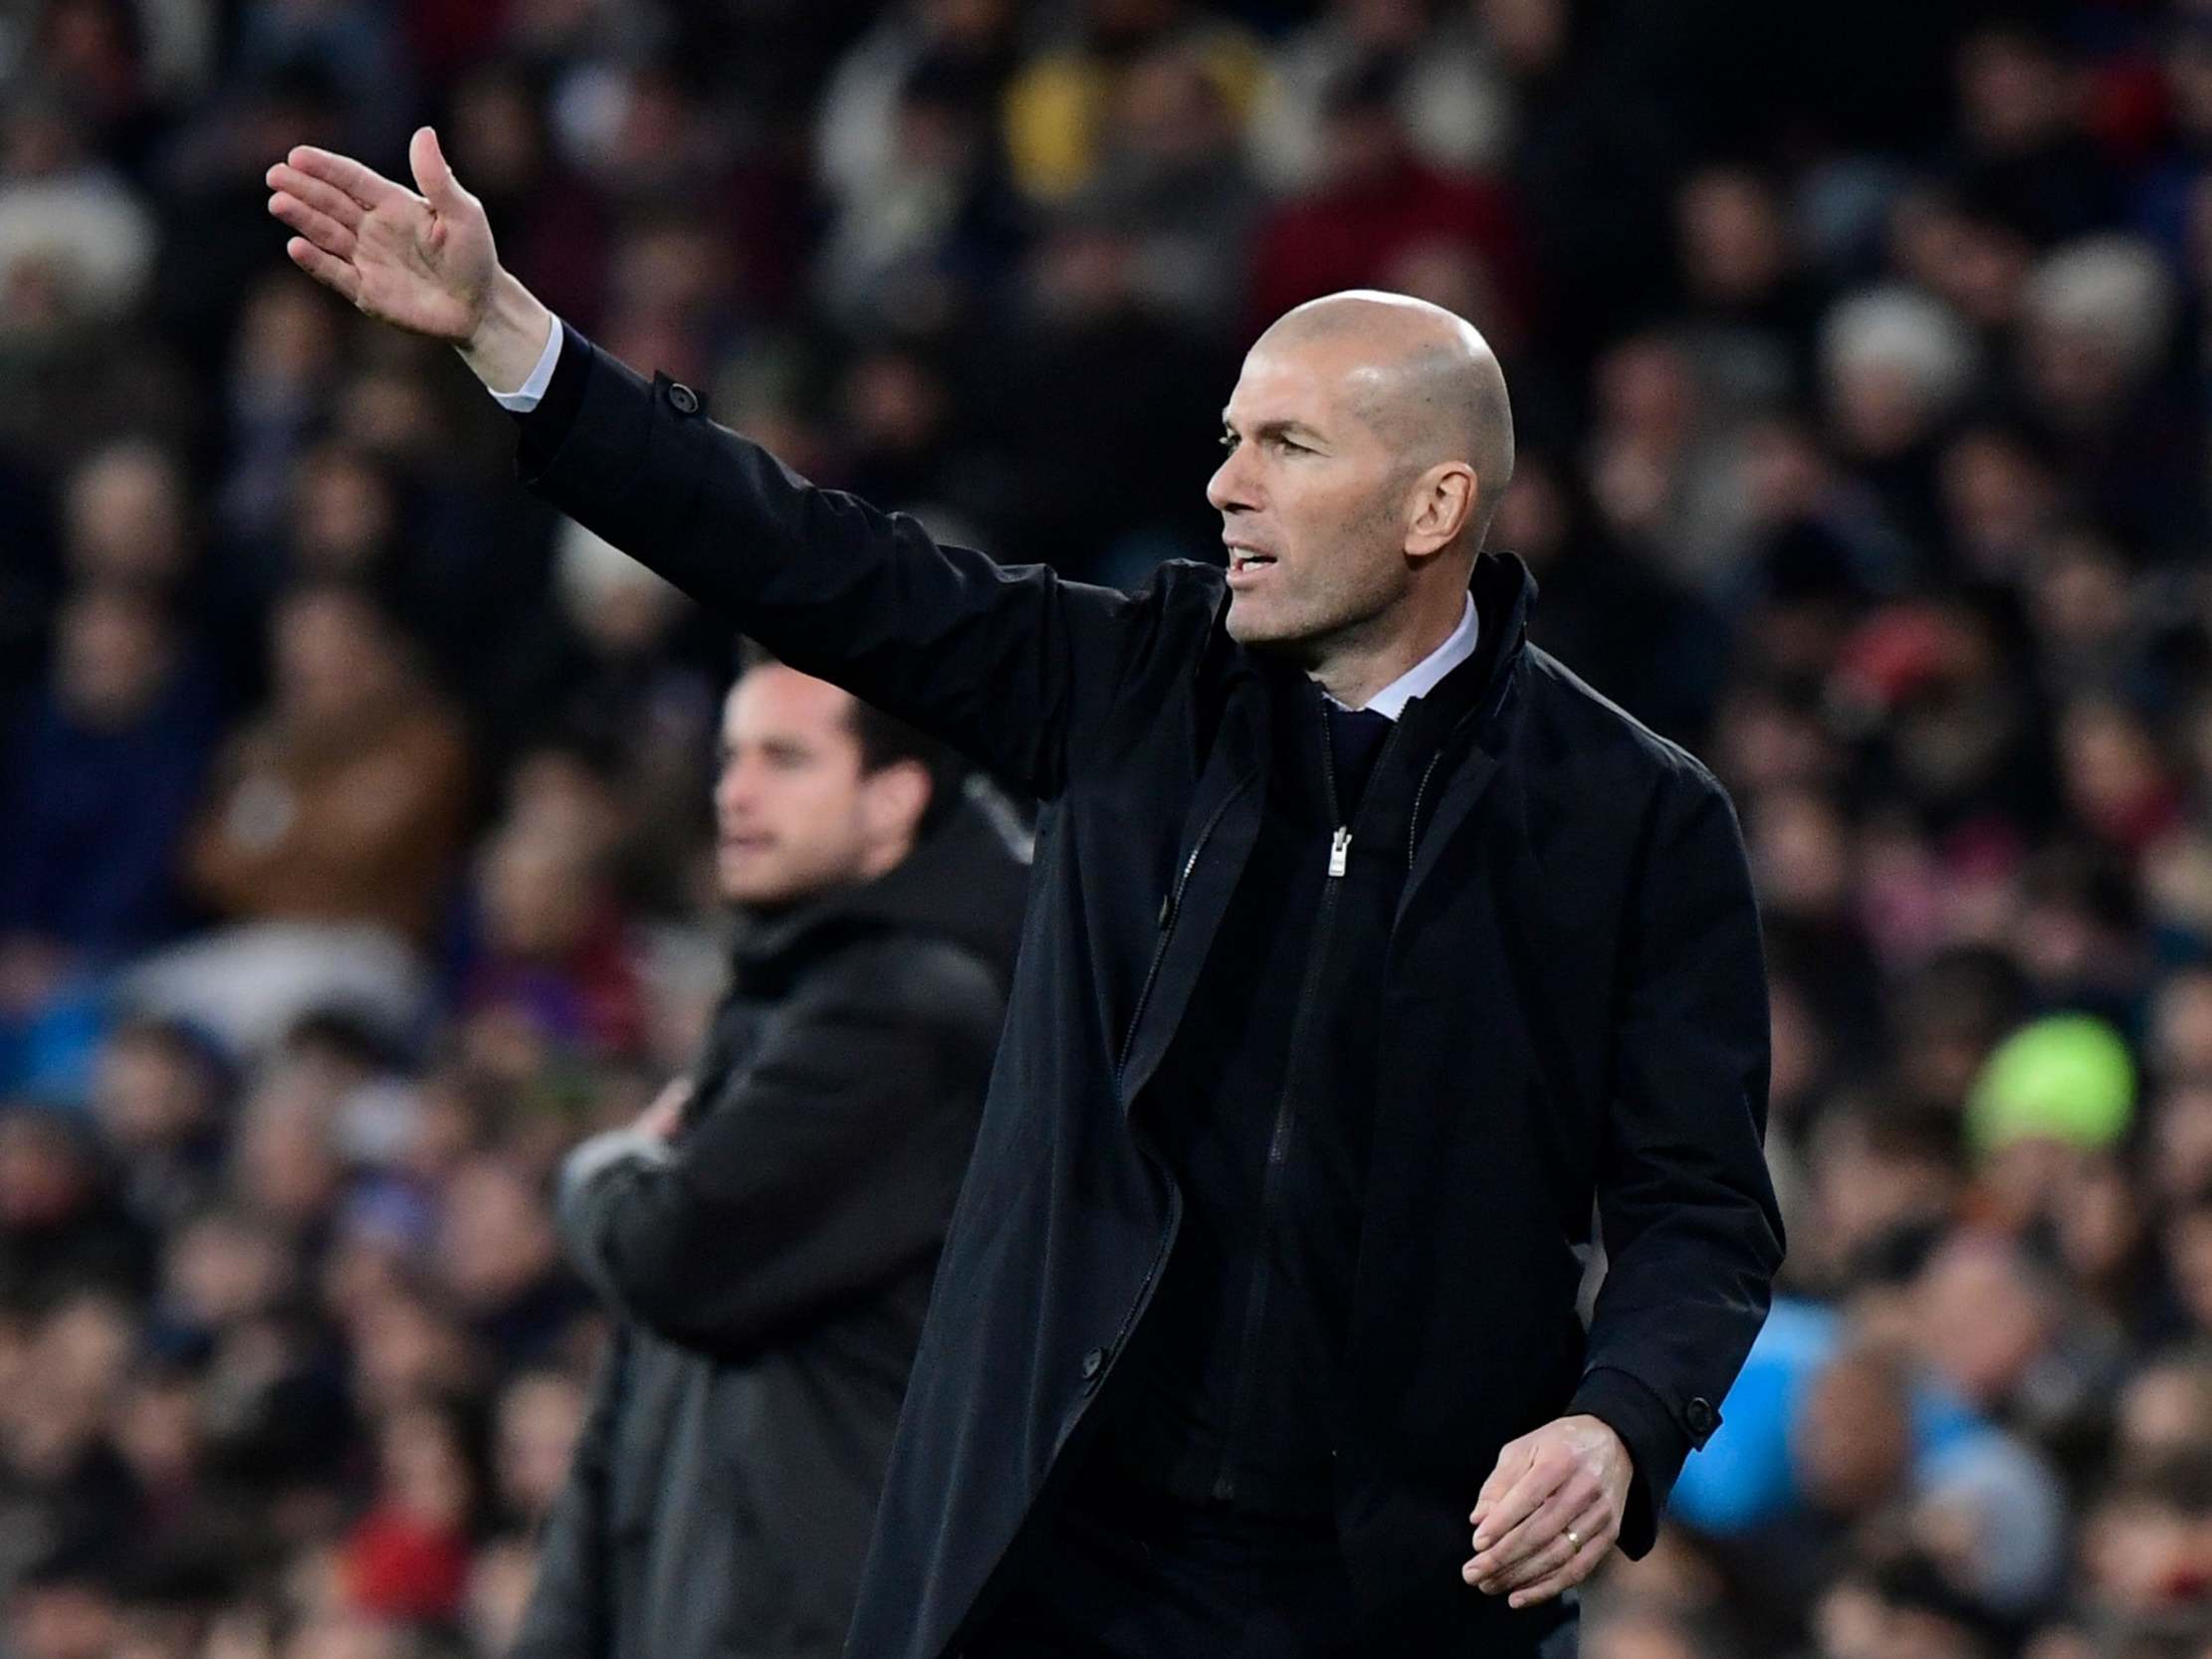 Zinedine Zidane looked a man who knew his side needed a rest